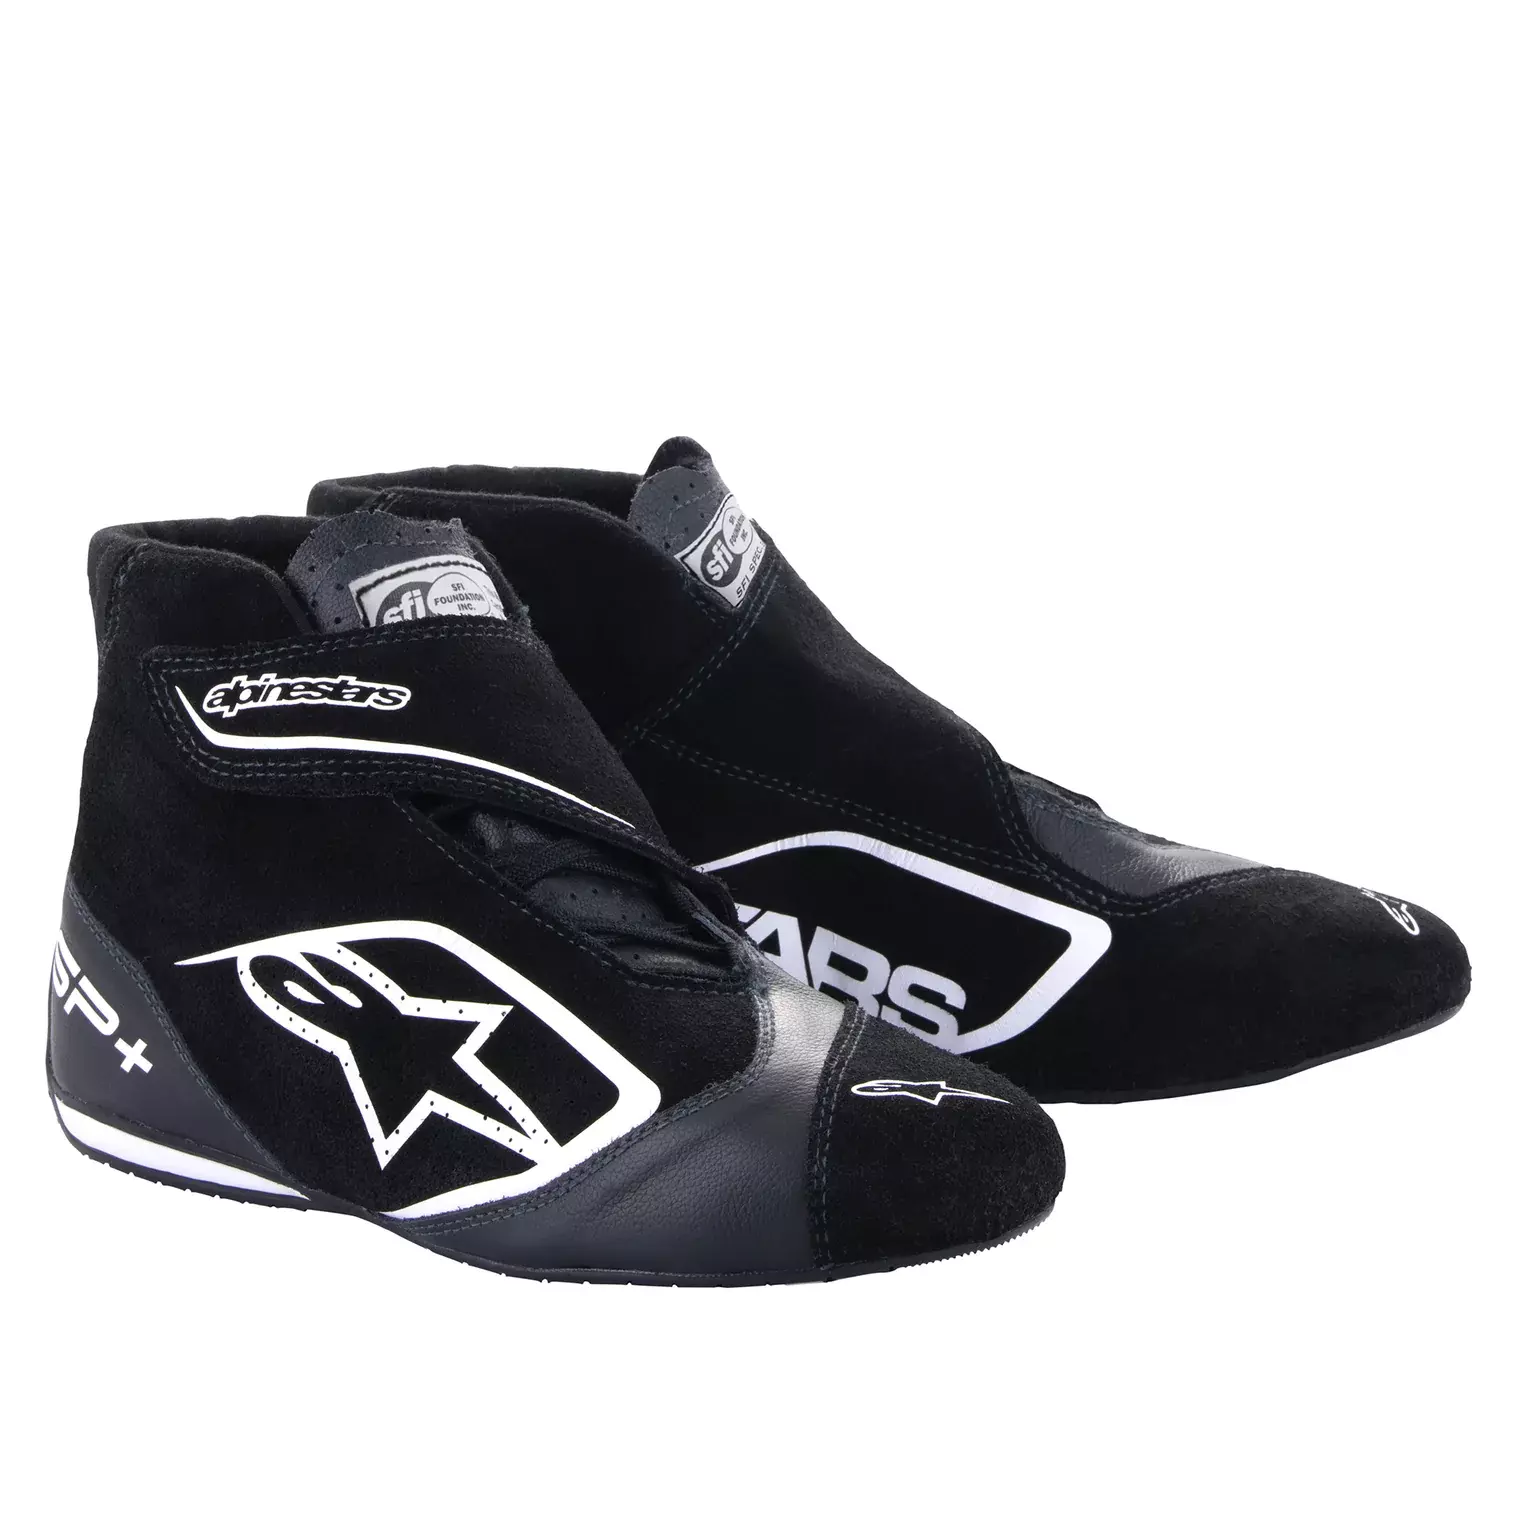 Alpinestars 2710823-12-8.5 Driving Shoe, SP+, Mid-Top, SFI 3.3, FIA Approved, Suede Outer, Nomex Inner, Black / White, Size 8.5, Pair